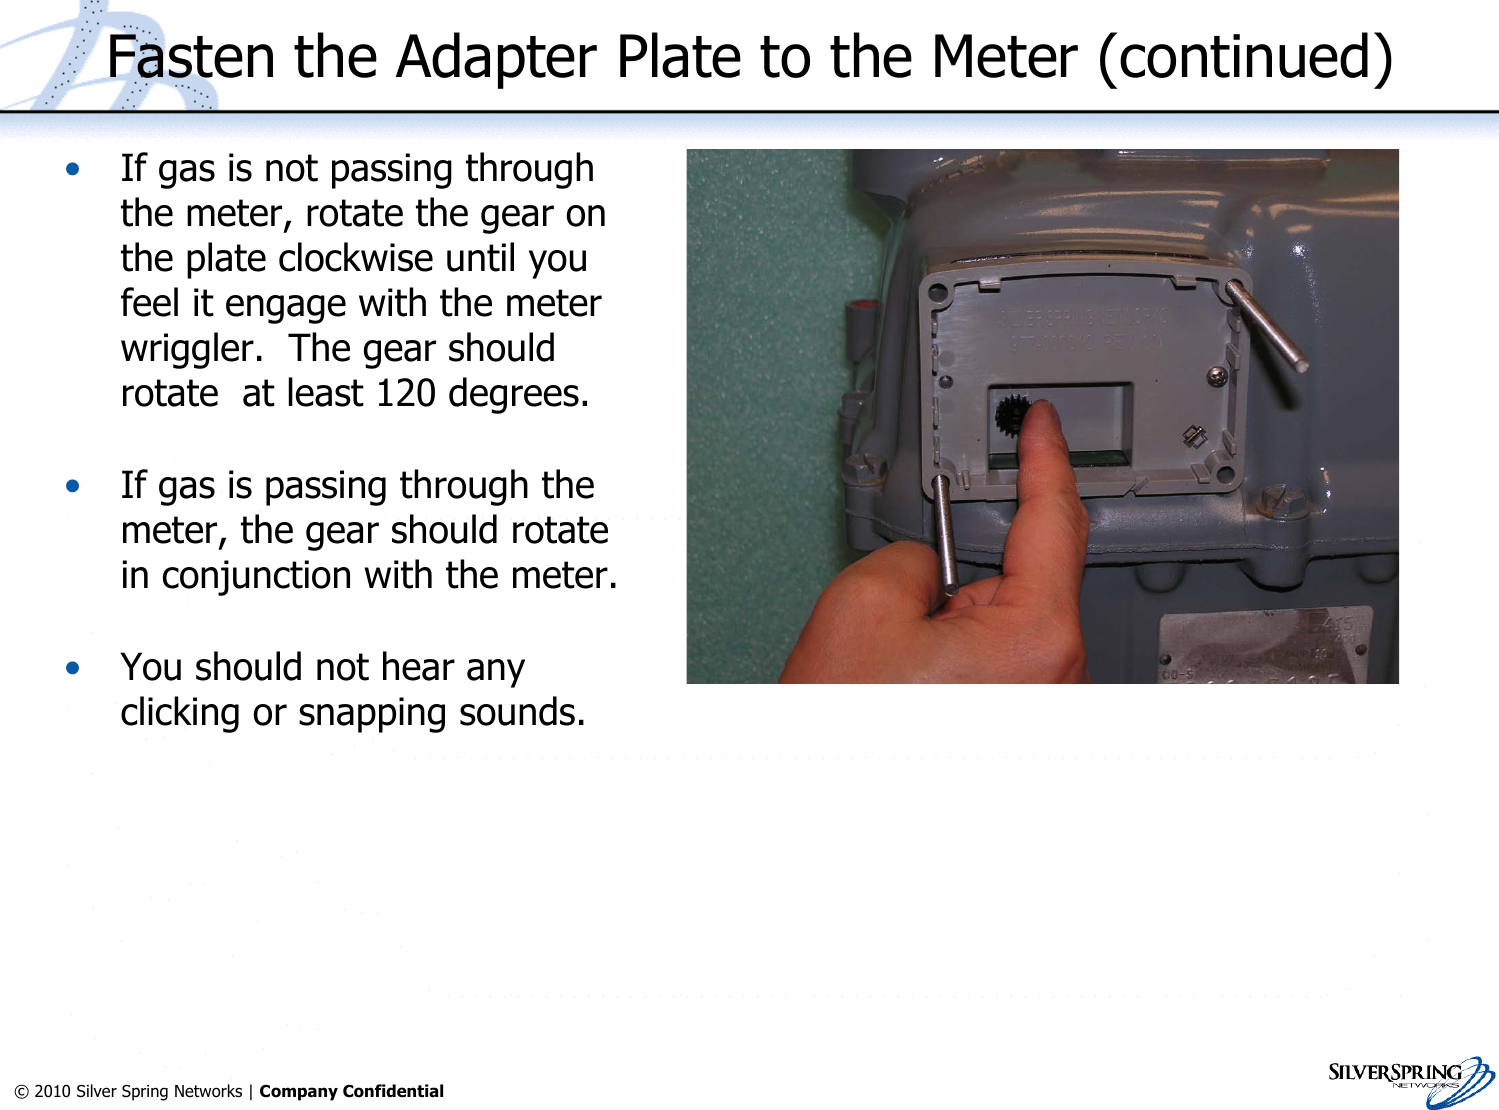 30© 2010 Silver Spring Networks | Company Confidential Fasten the Adapter Plate to the Meter (continued)•If gas is not passing throughthe meter, rotate the gear onthe plate clockwise until youfeel it engage with the meterwriggler.  The gear shouldrotate  at least 120 degrees.•If gas is passing through themeter, the gear should rotatein conjunction with the meter.•You should not hear anyclicking or snapping sounds.